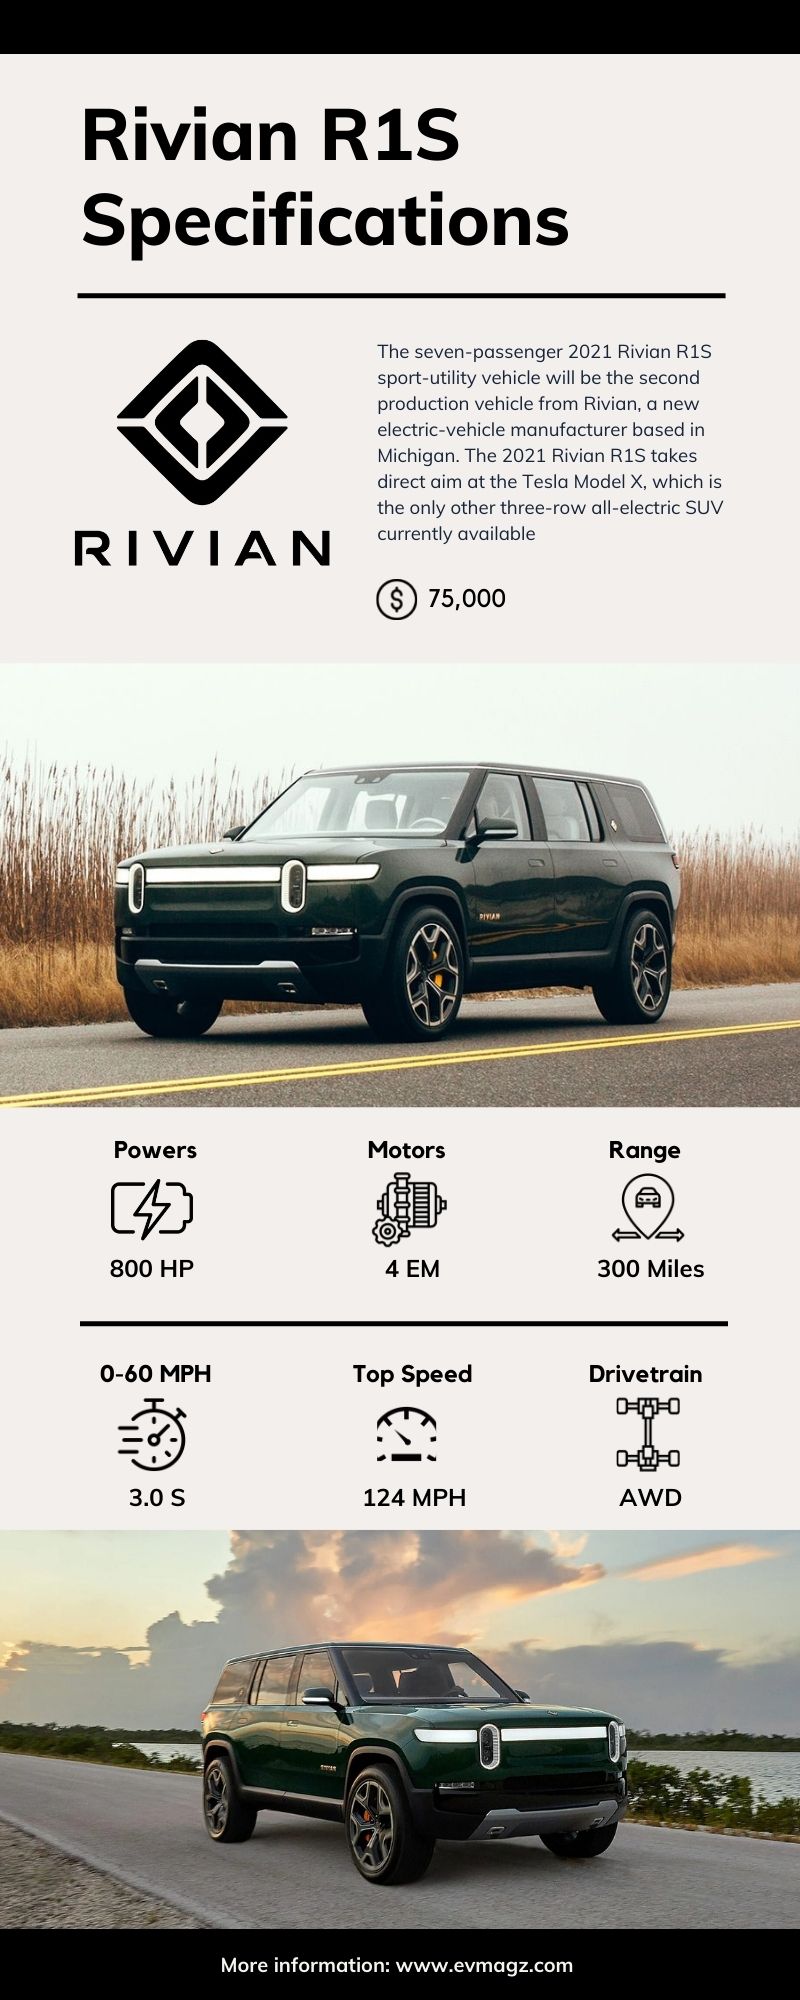 Rivian R1S Specification Infographic - Rivian R1S Price and Specification [Infographic]